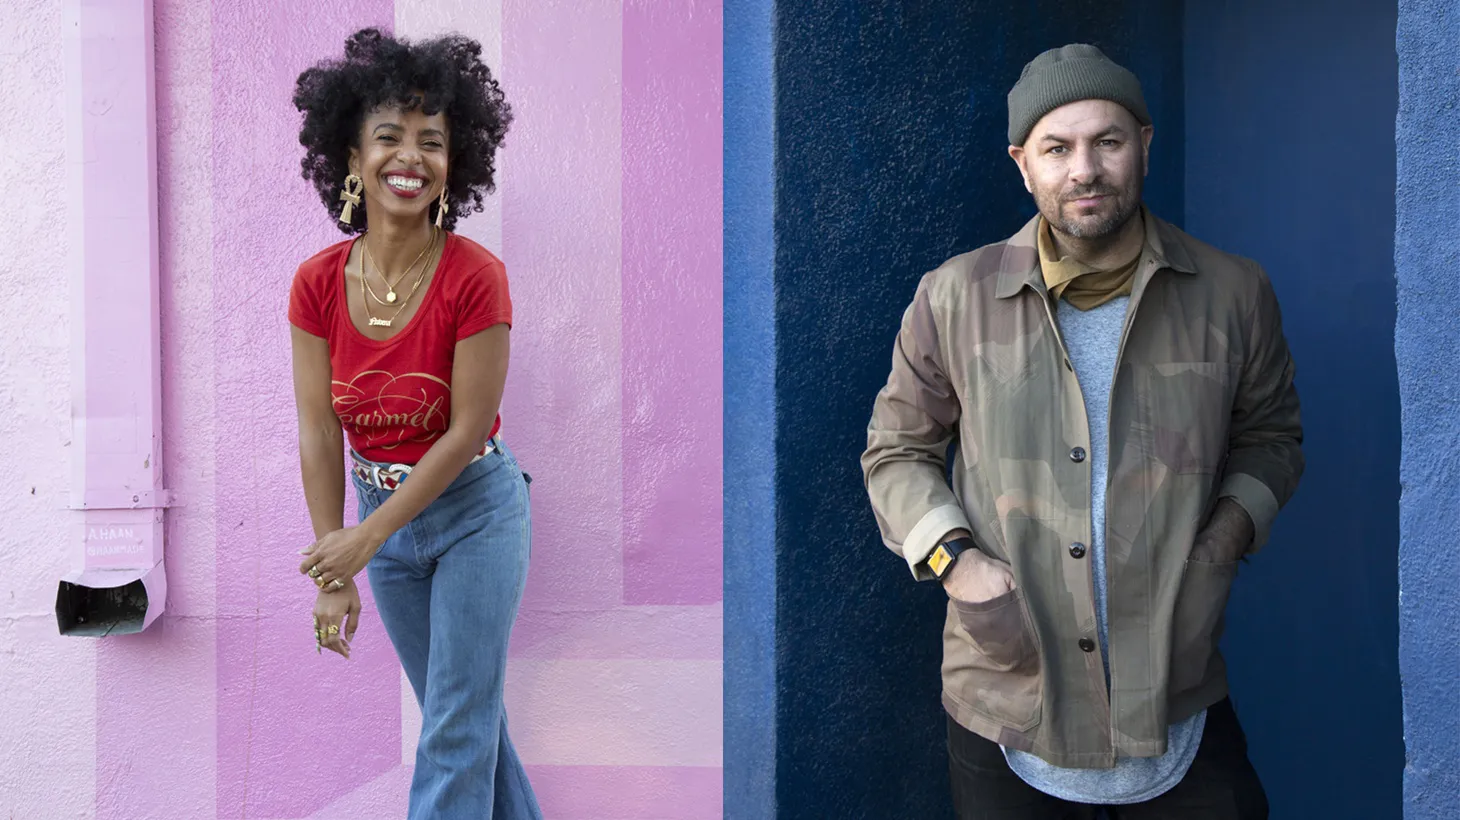 Grammy noms are here, and we’ve got ‘em cued up on deck. Plus, new gems from Berlin duo strongboi.